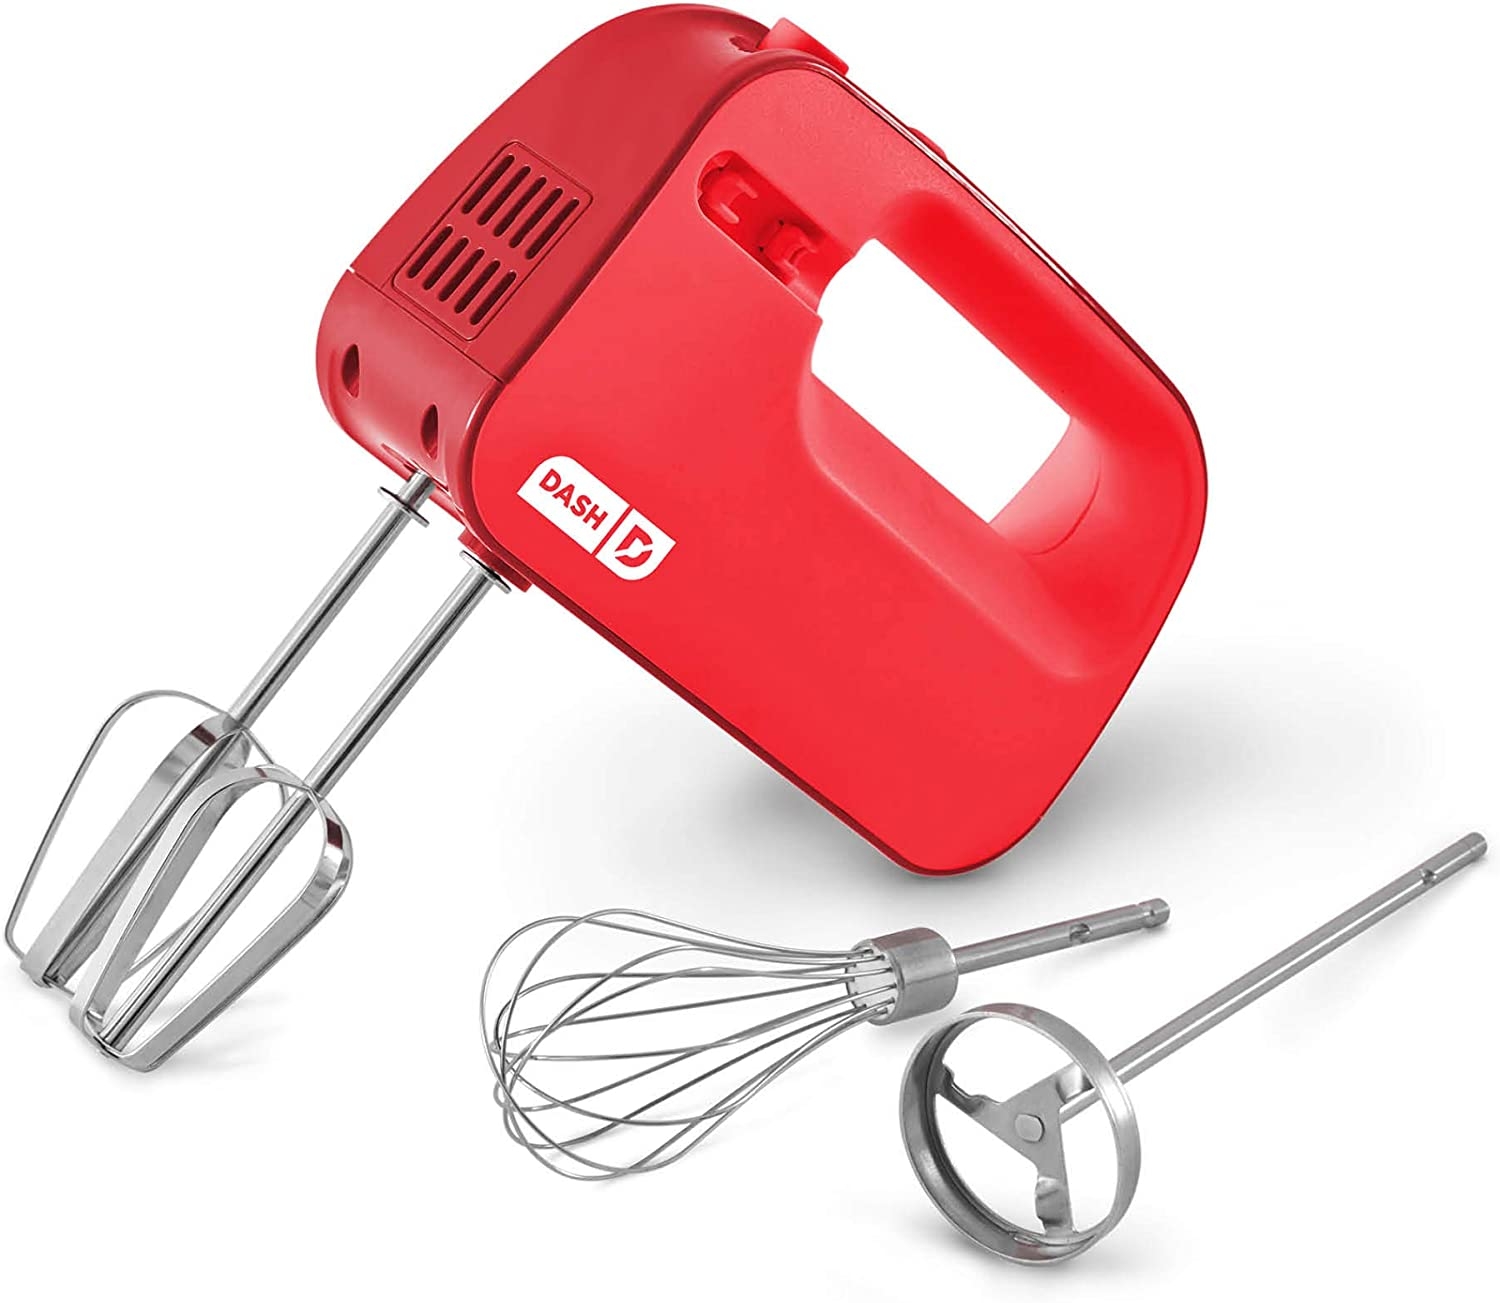 Dash SmartStore™ Deluxe Compact Electric Hand Mixer + Whisk and Milkshake Attachment for Whipping, Mixing Cookies, Brownies,